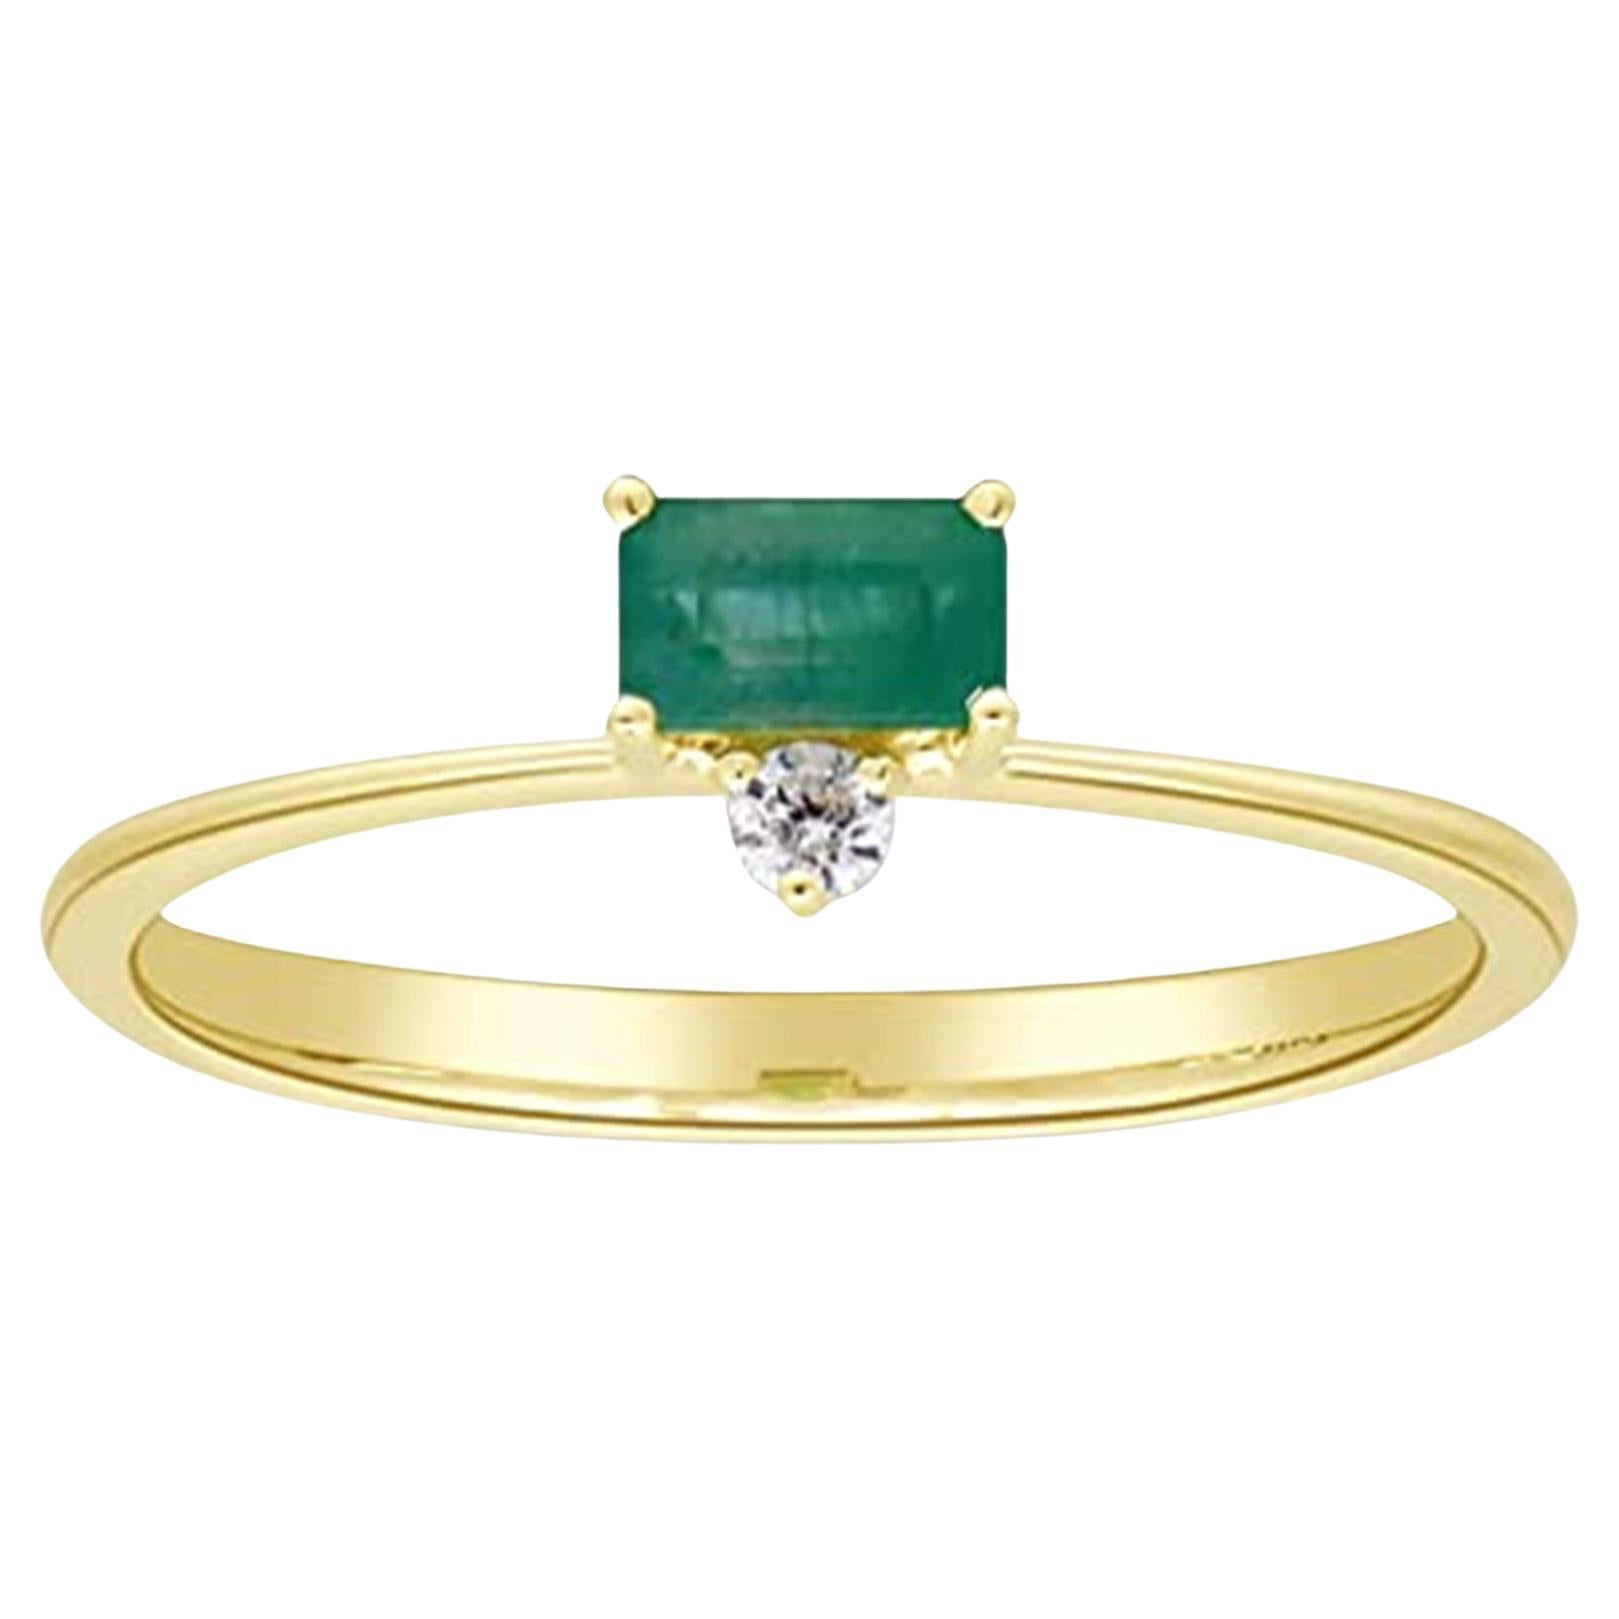 0.33 Carat Emerald-Cut Emerald with Diamond Accents 14K Yellow Gold Ring For Sale